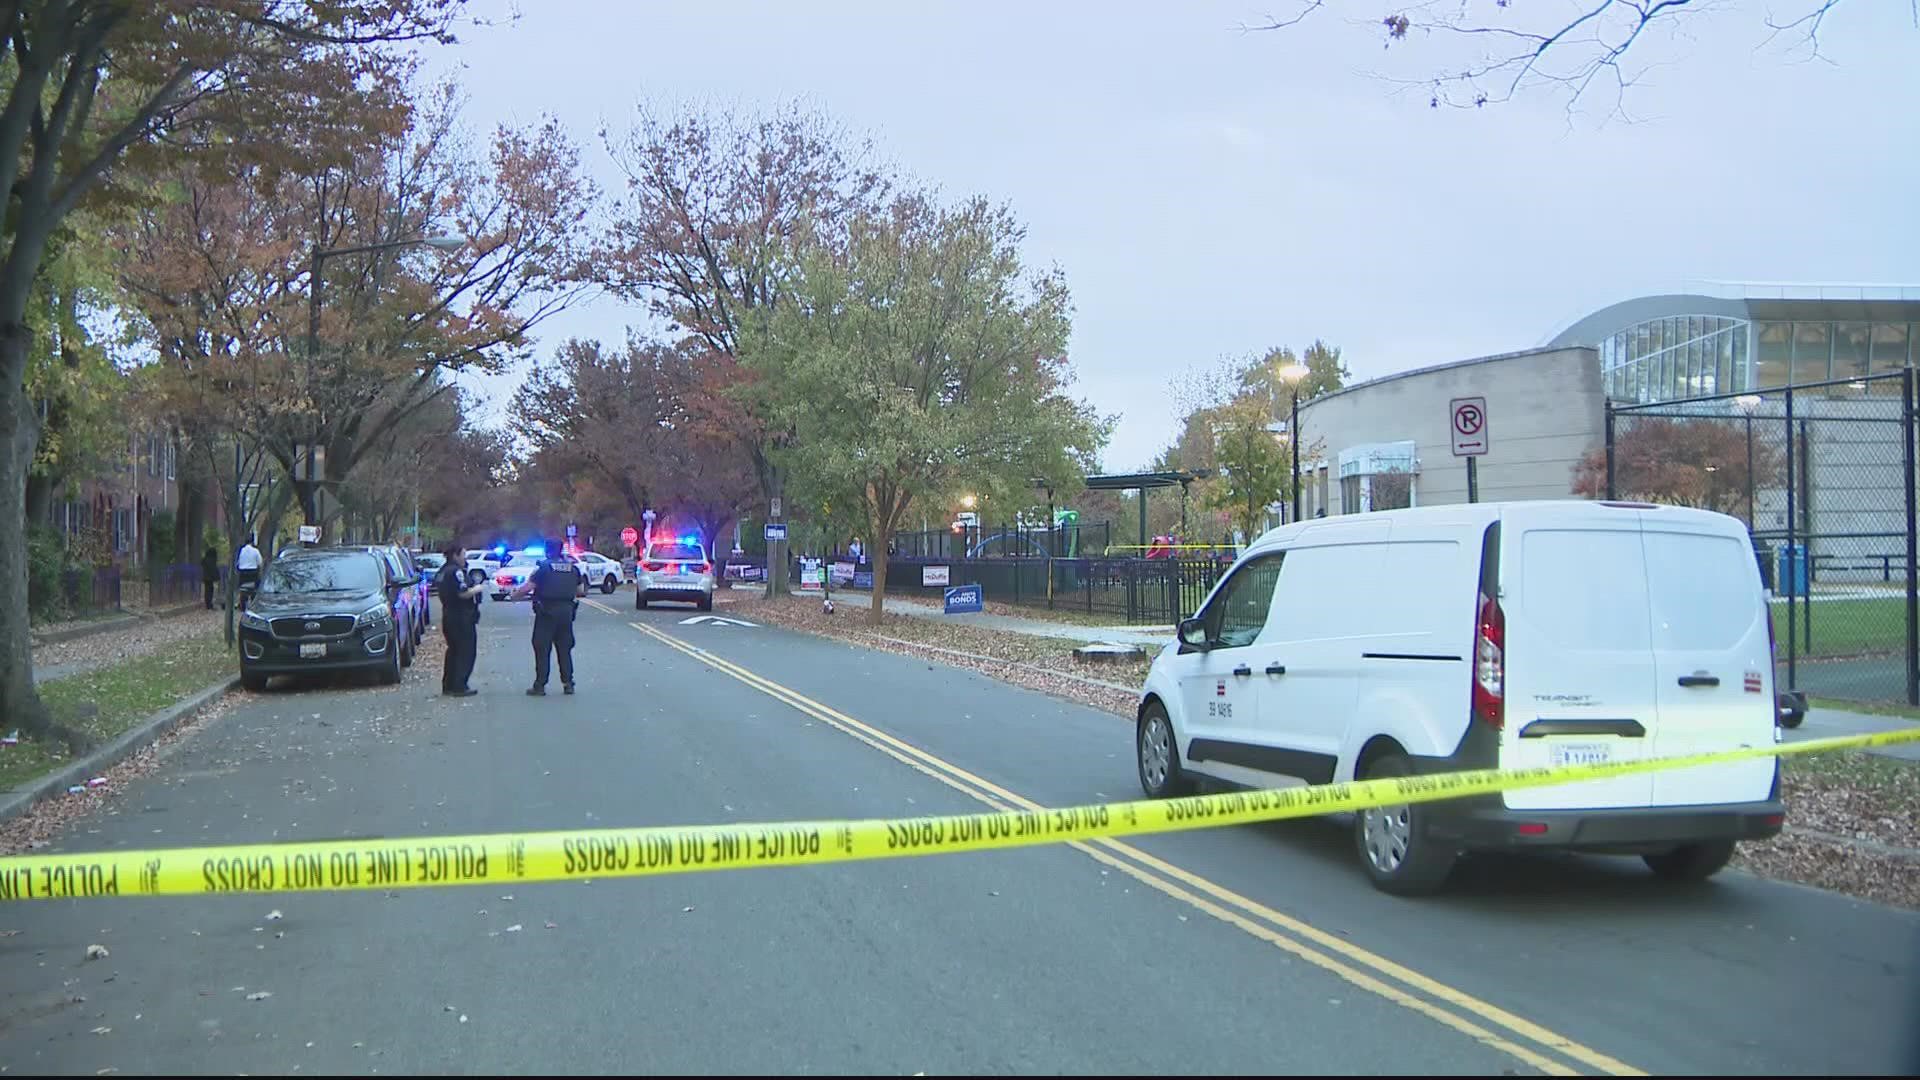 Two teenagers were shot in broad daylight outside the King Greenleaf Recreation Center in Southwest D.C.